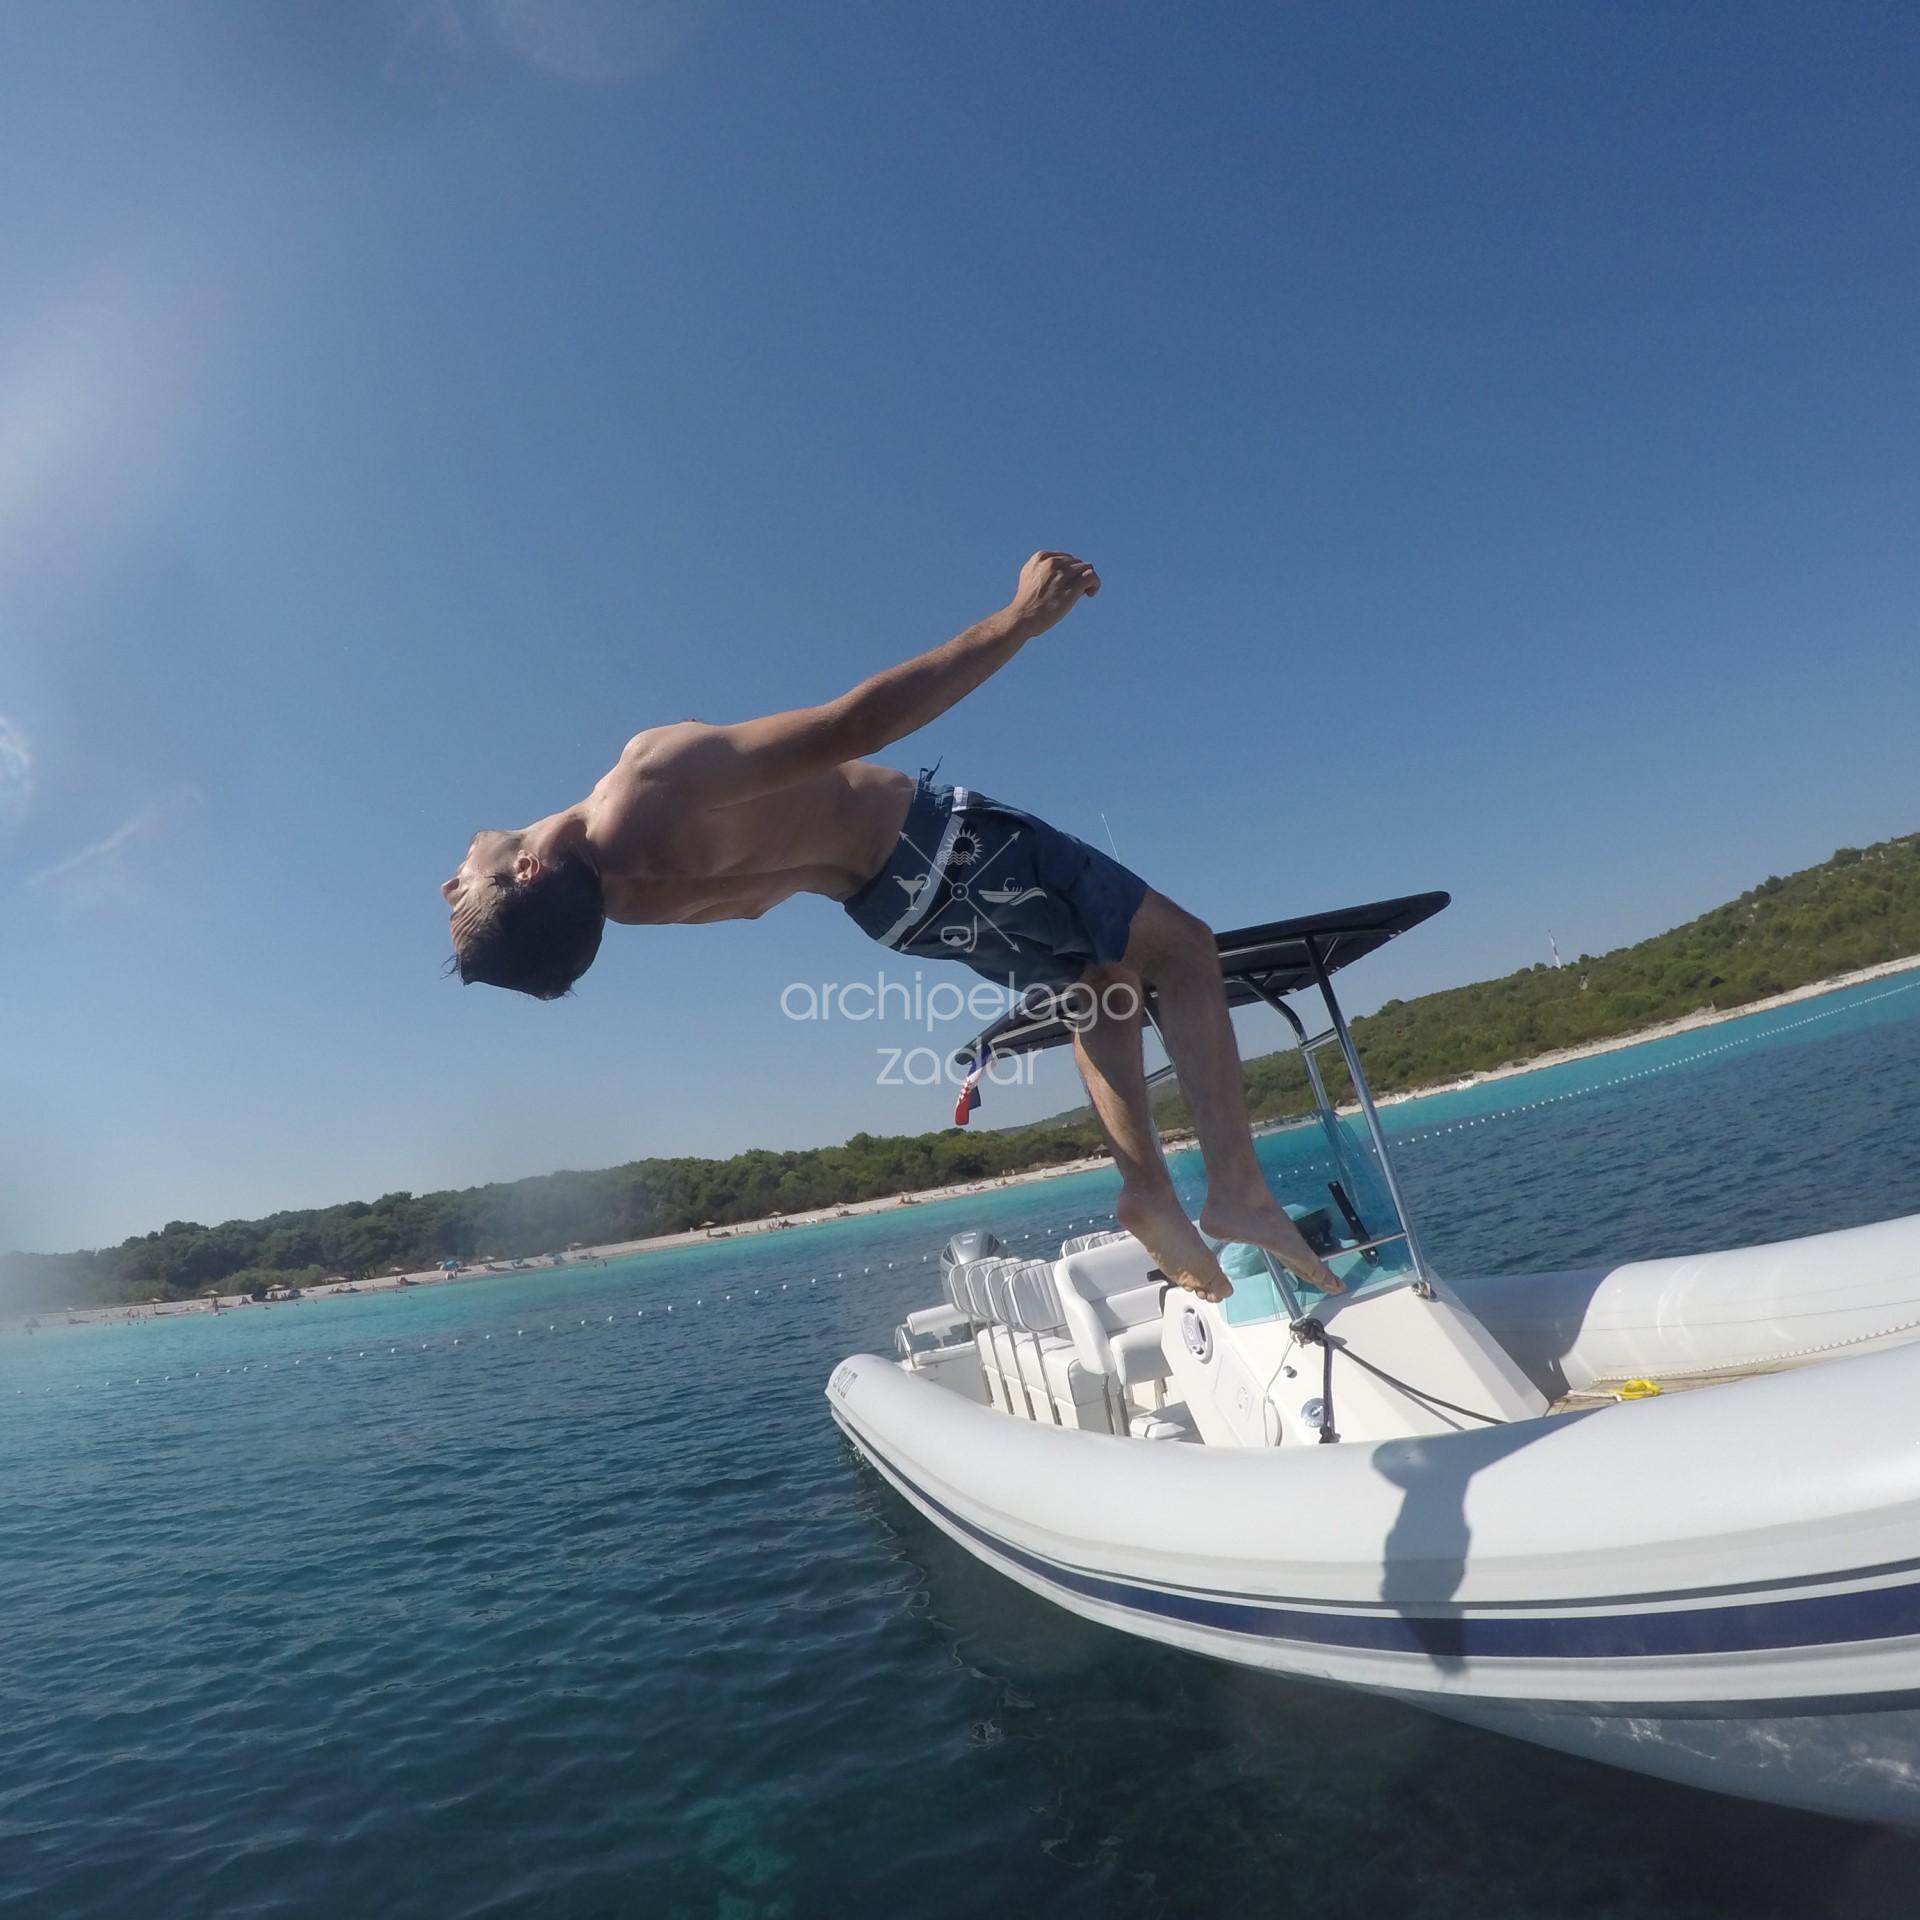 guy jumping from the boat 